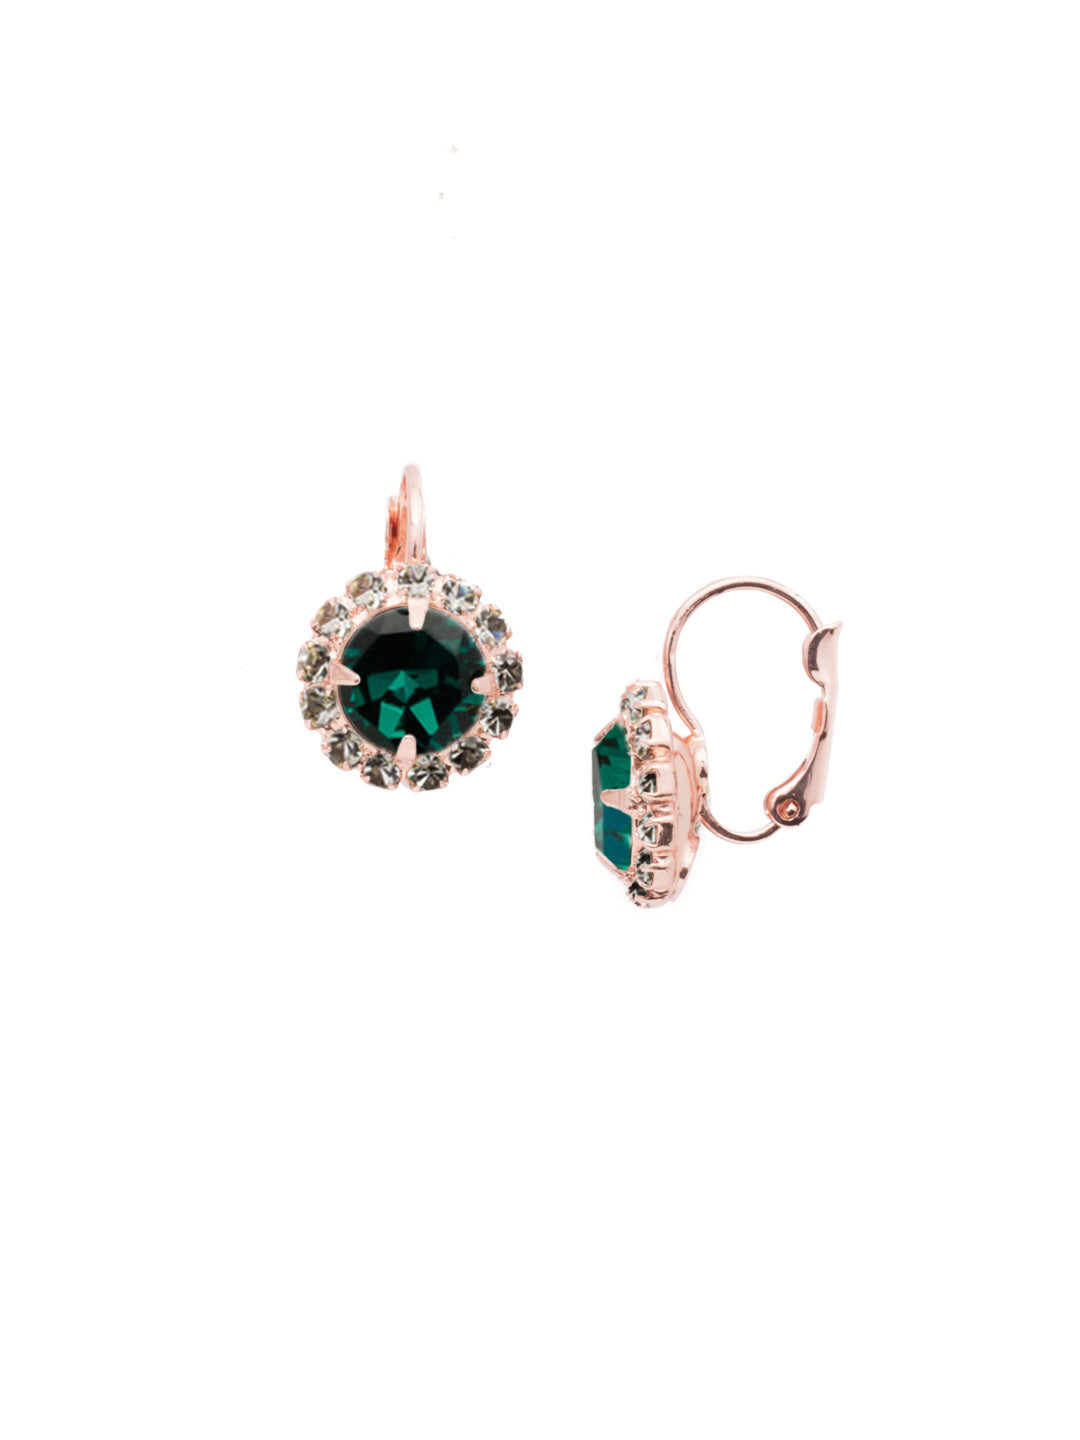 Haute Halo Dangle Earrings - EDL10RGEME - <p>A central round crystal with an elegant halo of gems embodies elegance and style. From Sorrelli's Emerald collection in our Rose Gold-tone finish.</p>